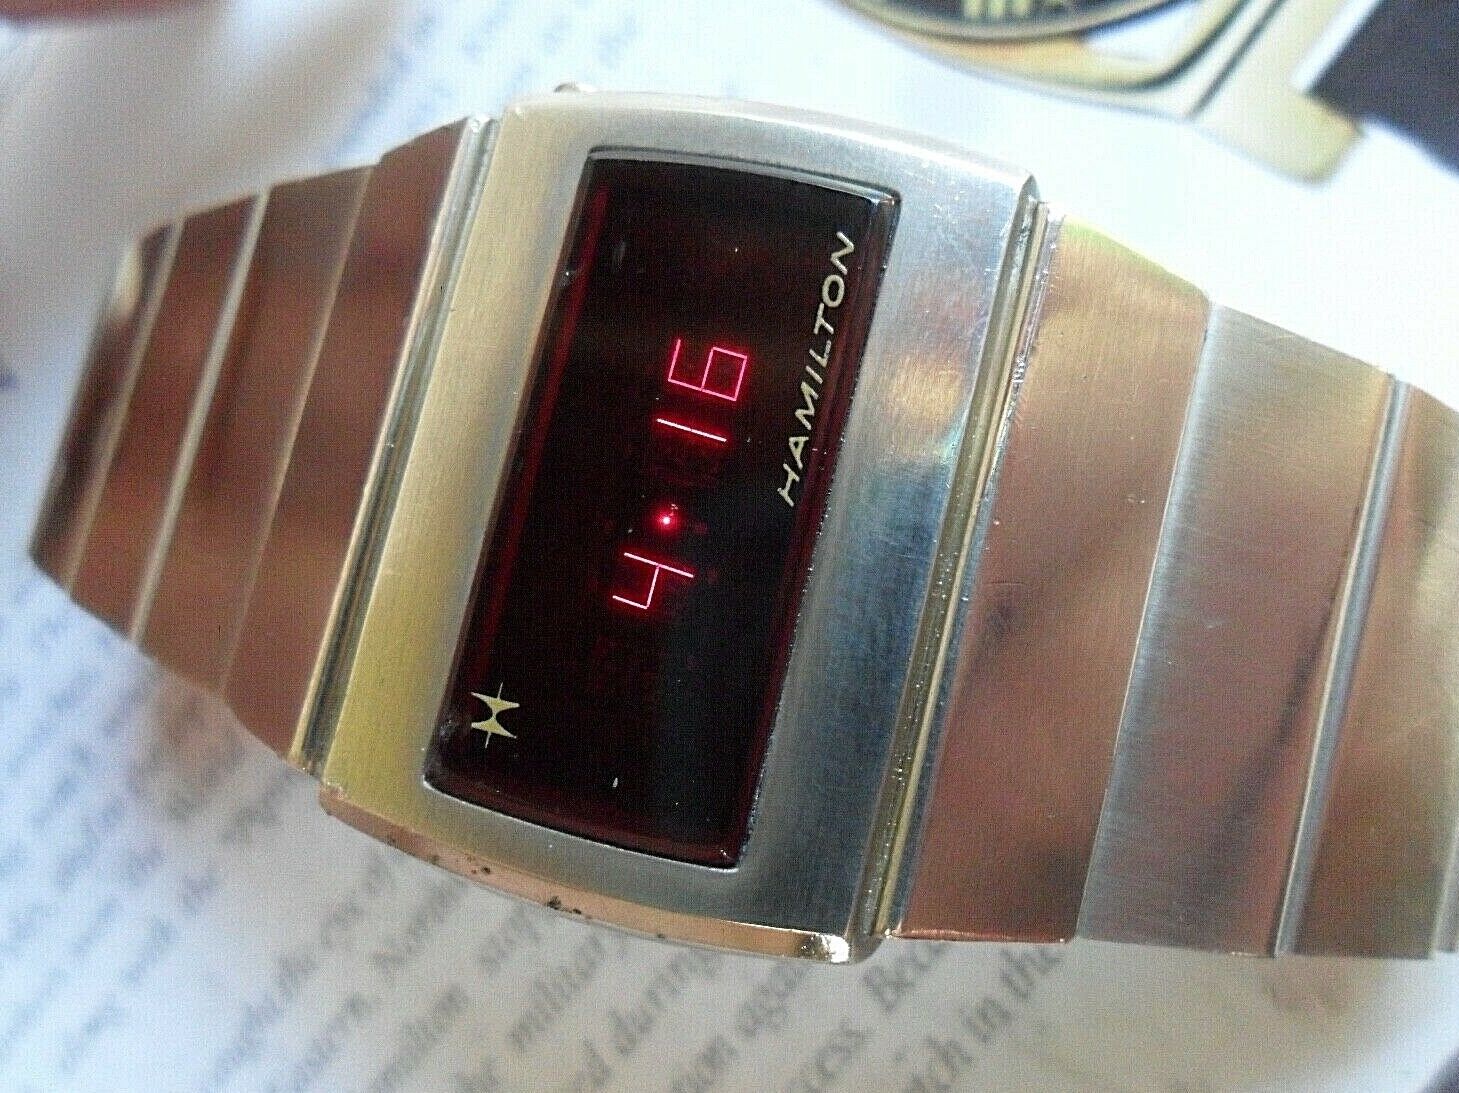 early digital watches